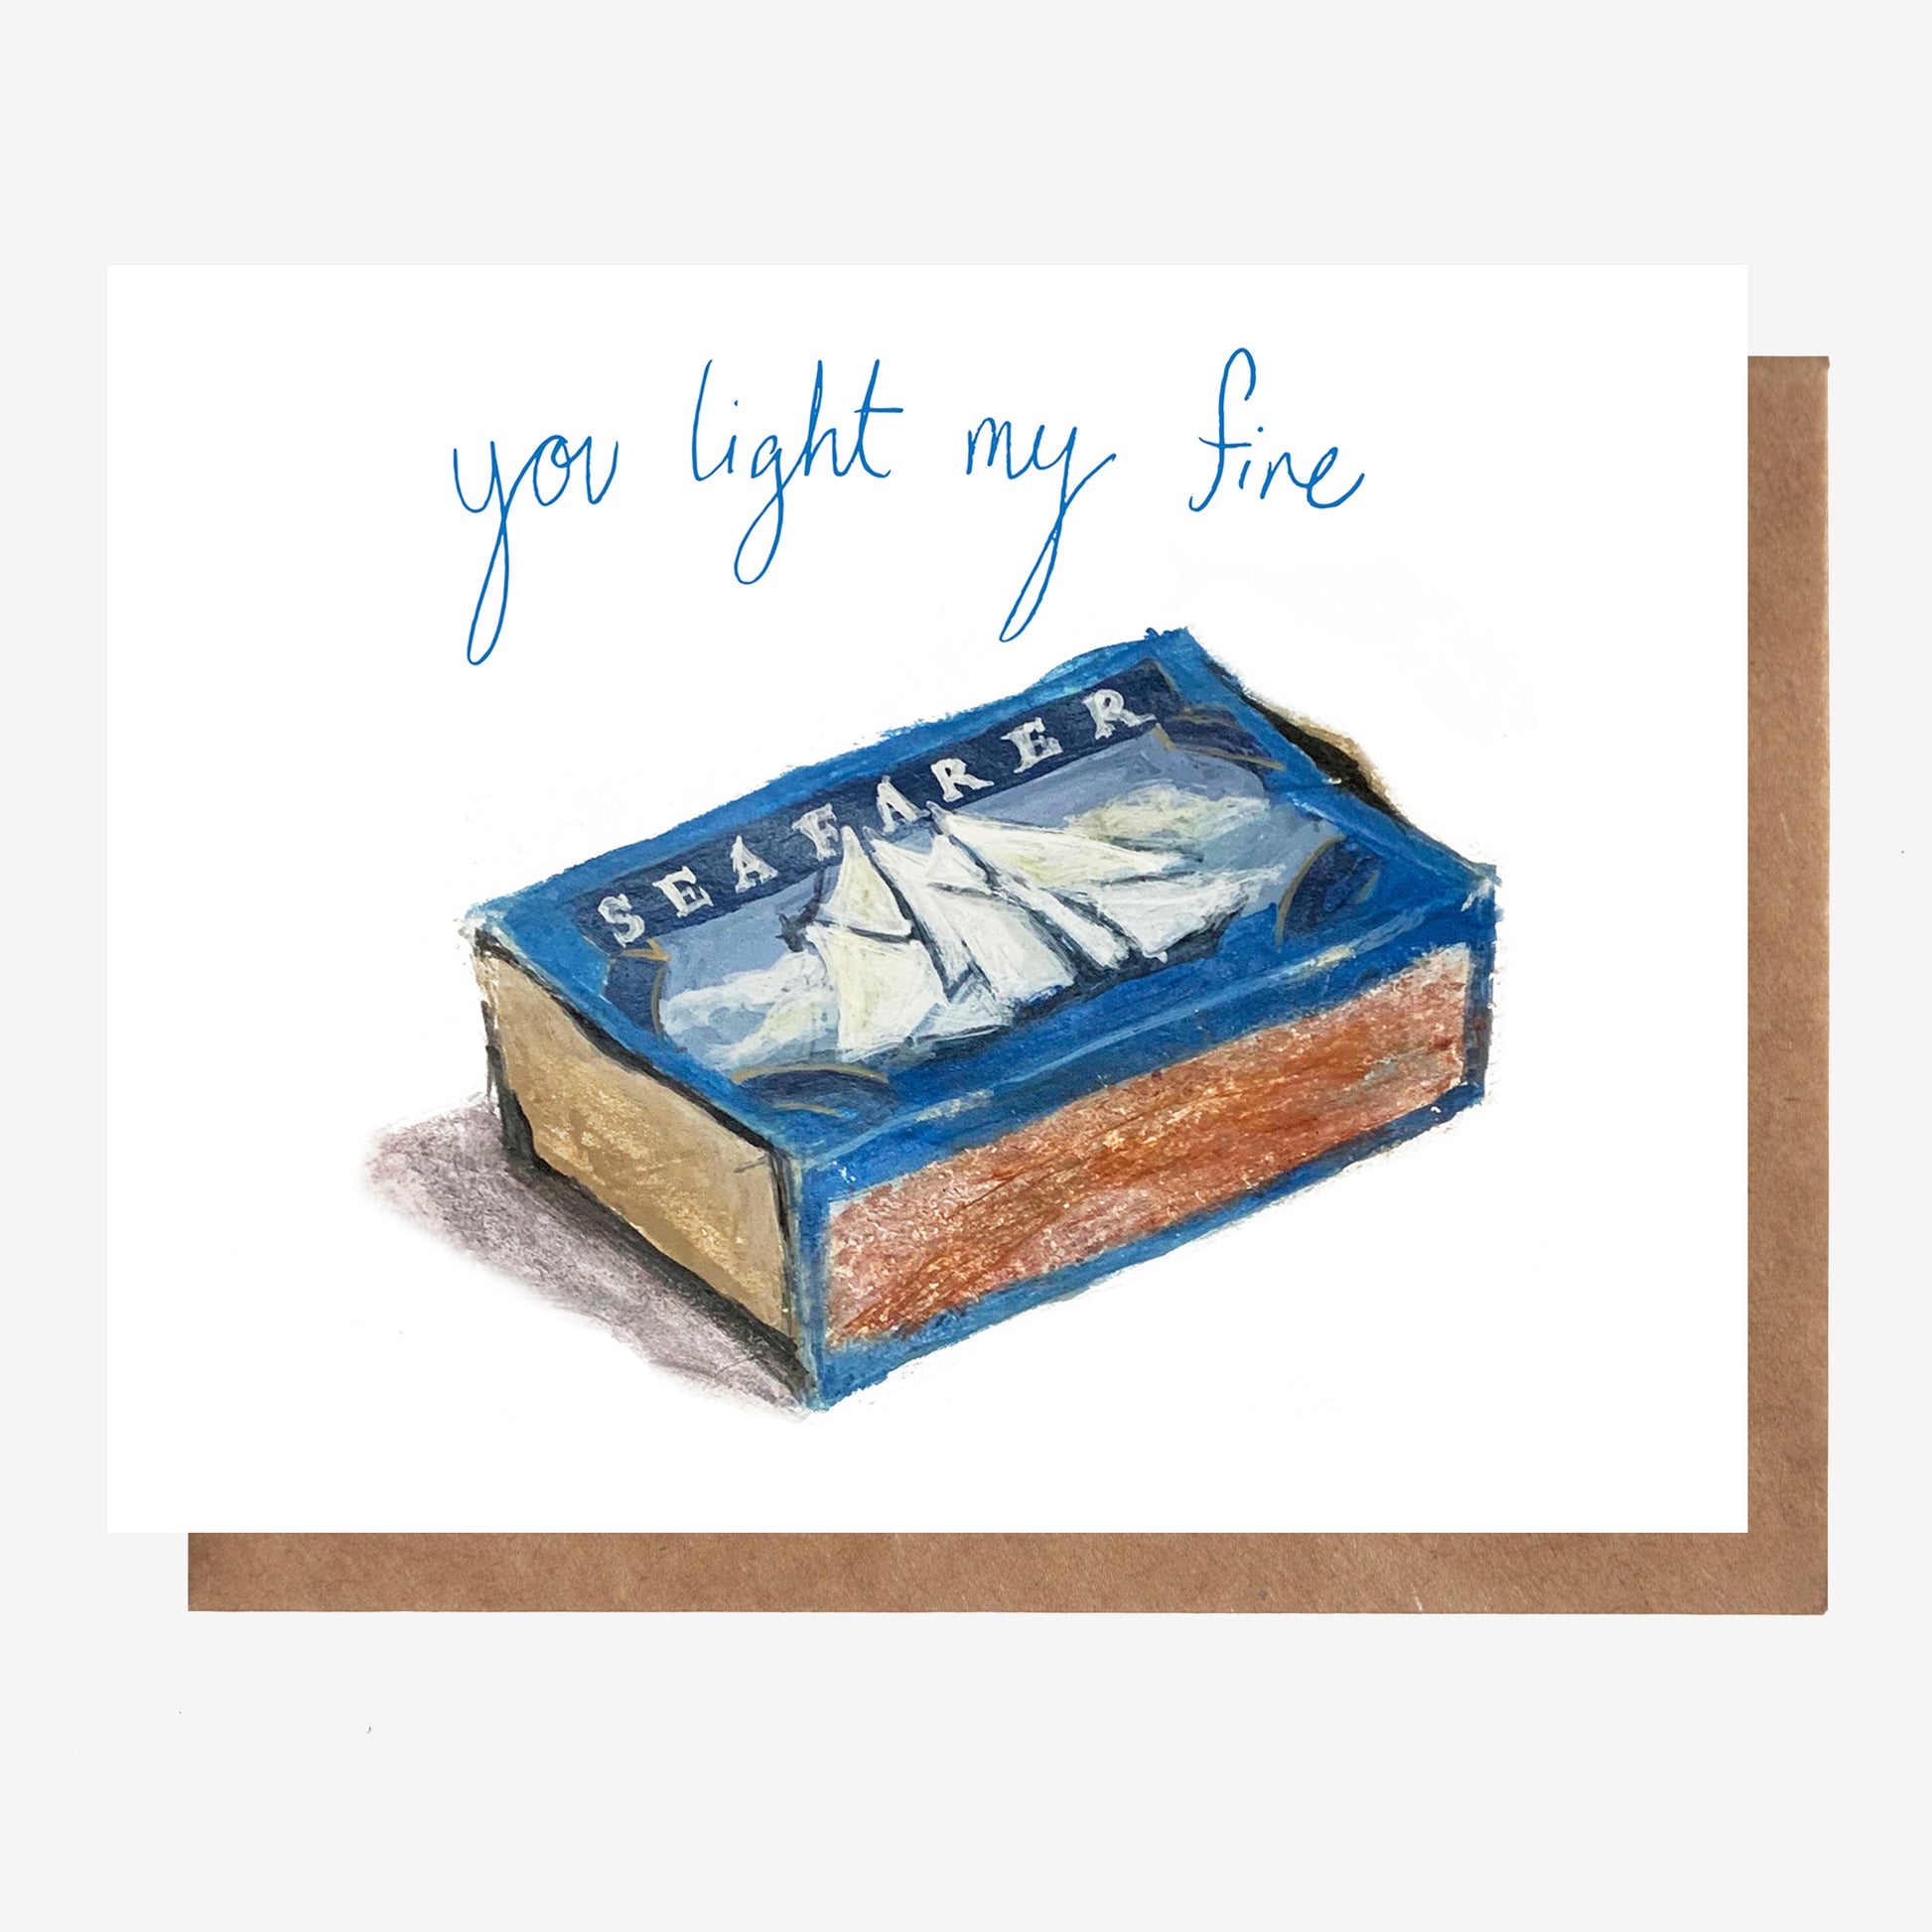 You light my fire! Hand-drawn love and friendship card featuring a box of Seafarer matches, made in Nova Scotia, Canada by Coastal Card Co.